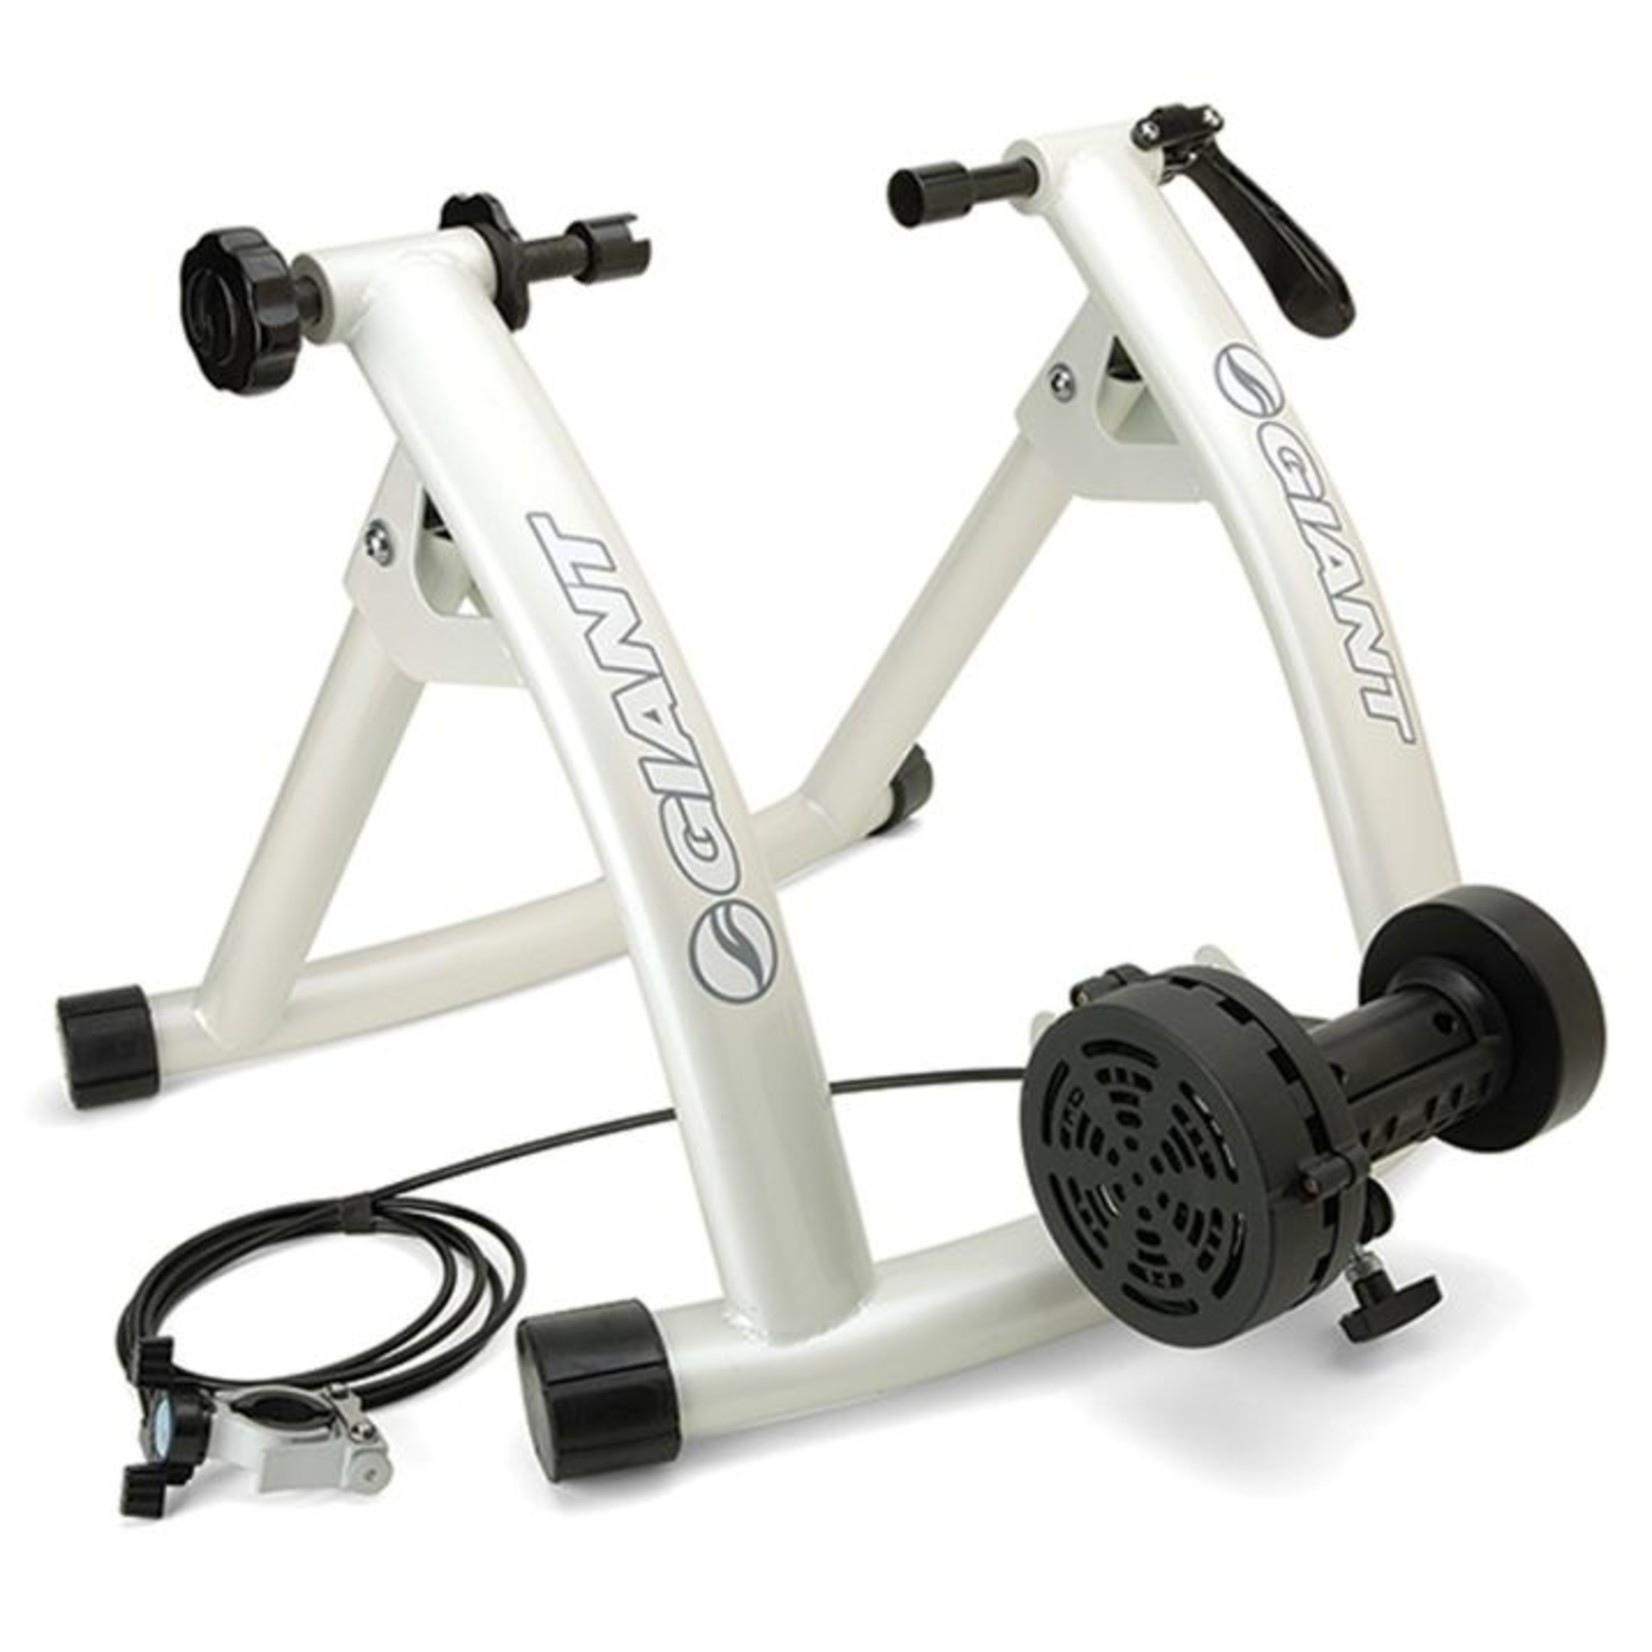 Giant Mag Silver Adjustable Trainer Cyclotron